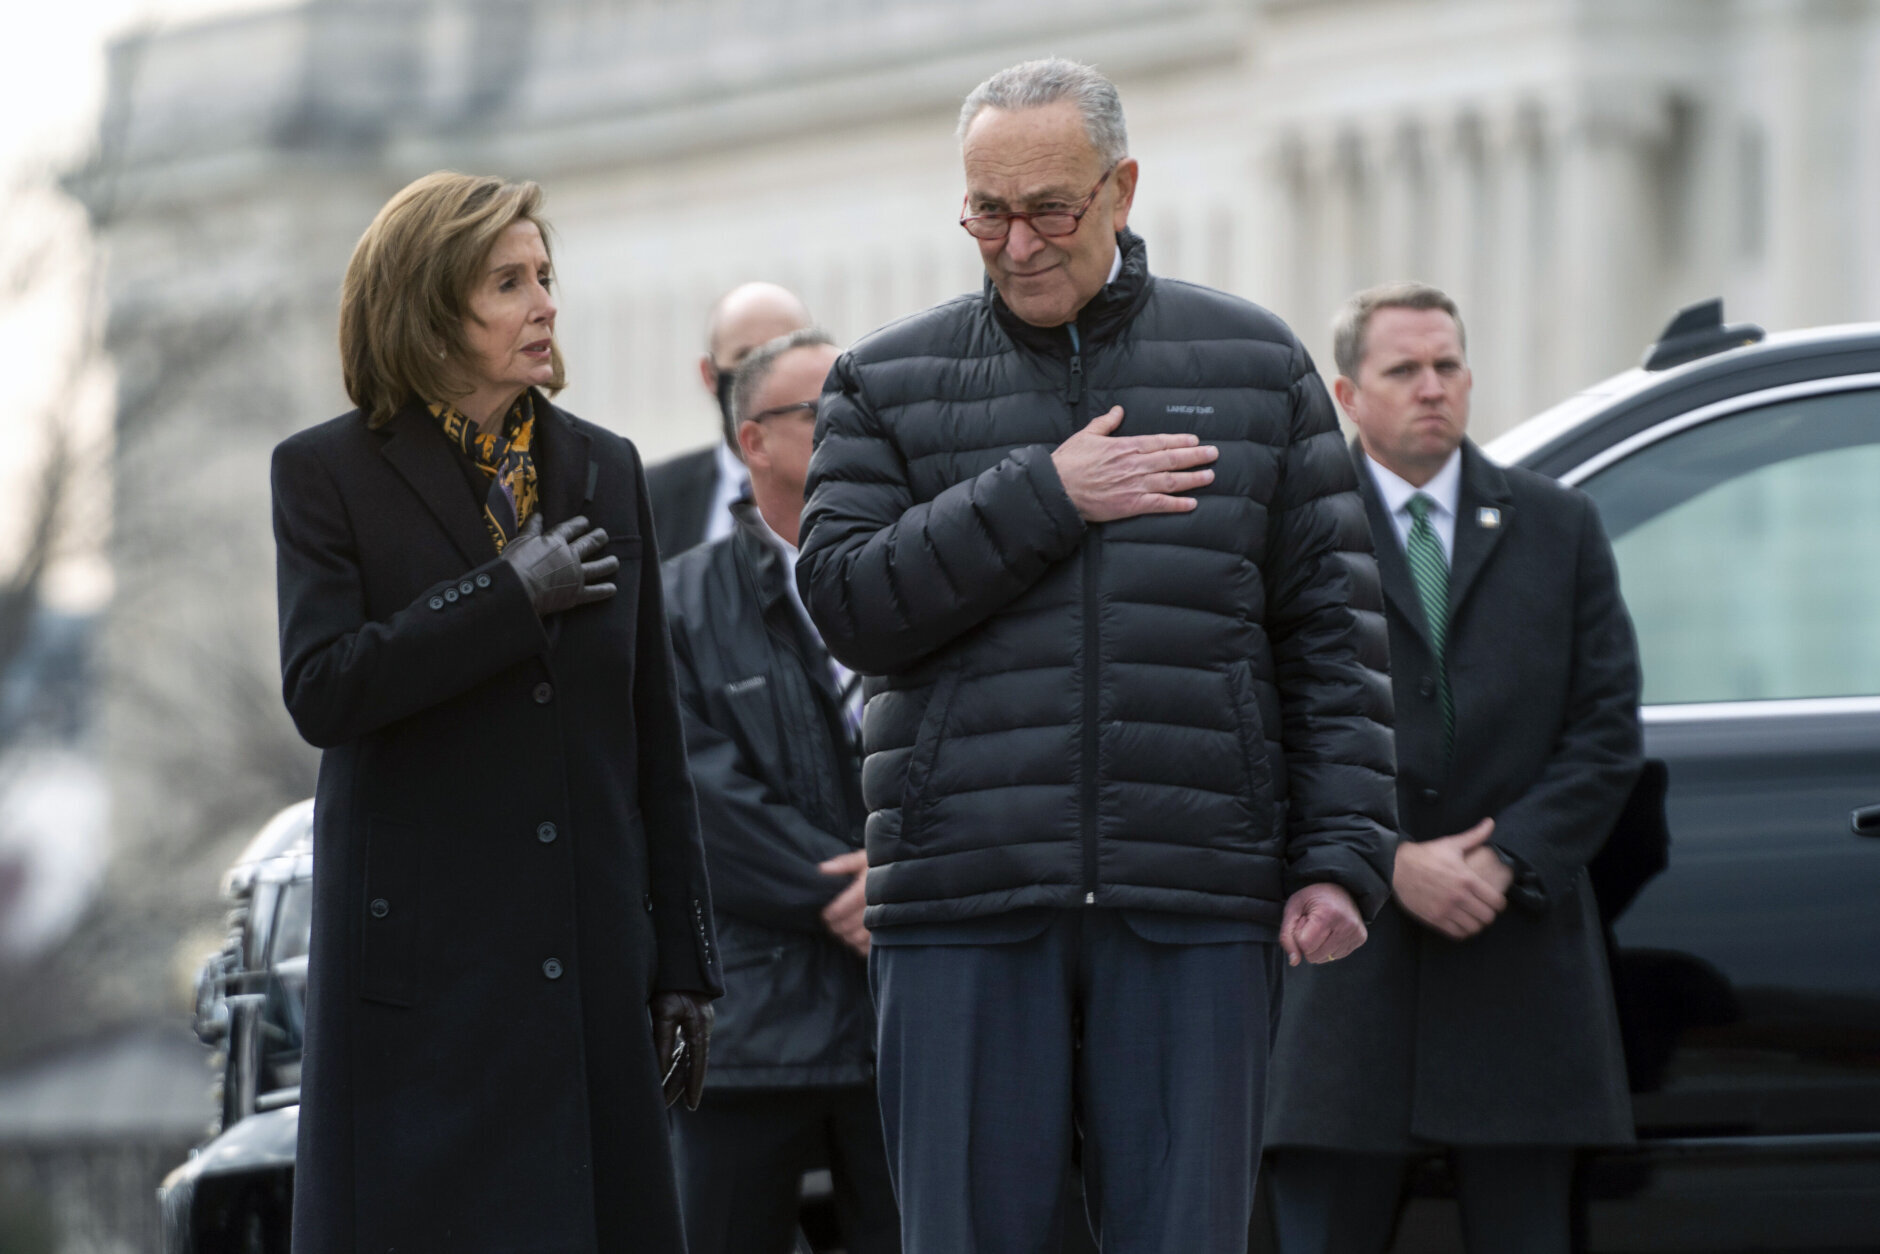 House Speaker Nancy Pelosi of Calif., and Senate Majority Leader Chuck Schumer of N.Y., watch as a military honor guard carries the flag-draped casket of former Sen. Bob Dole from the U.S. Capitol in Washington, Friday, Dec. 10, 2021, where he had lied in state on Thursday and over night.  (Greg Nash/Pool via AP)